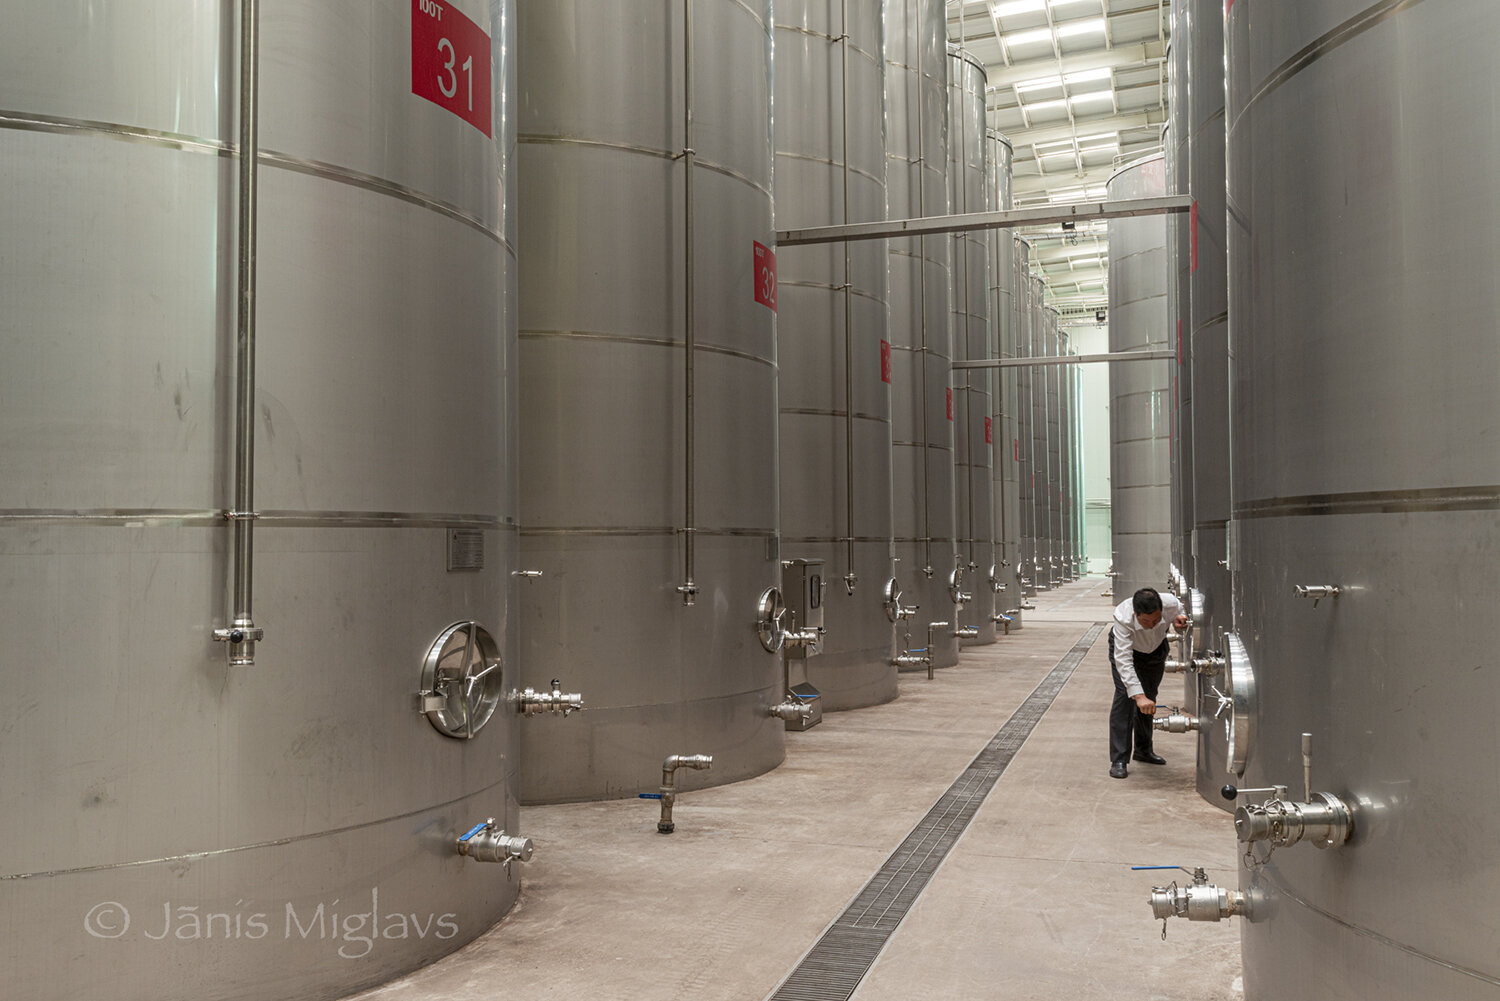 Stainless fermenting and storage tanks at Changyu Moser XV winery, China.